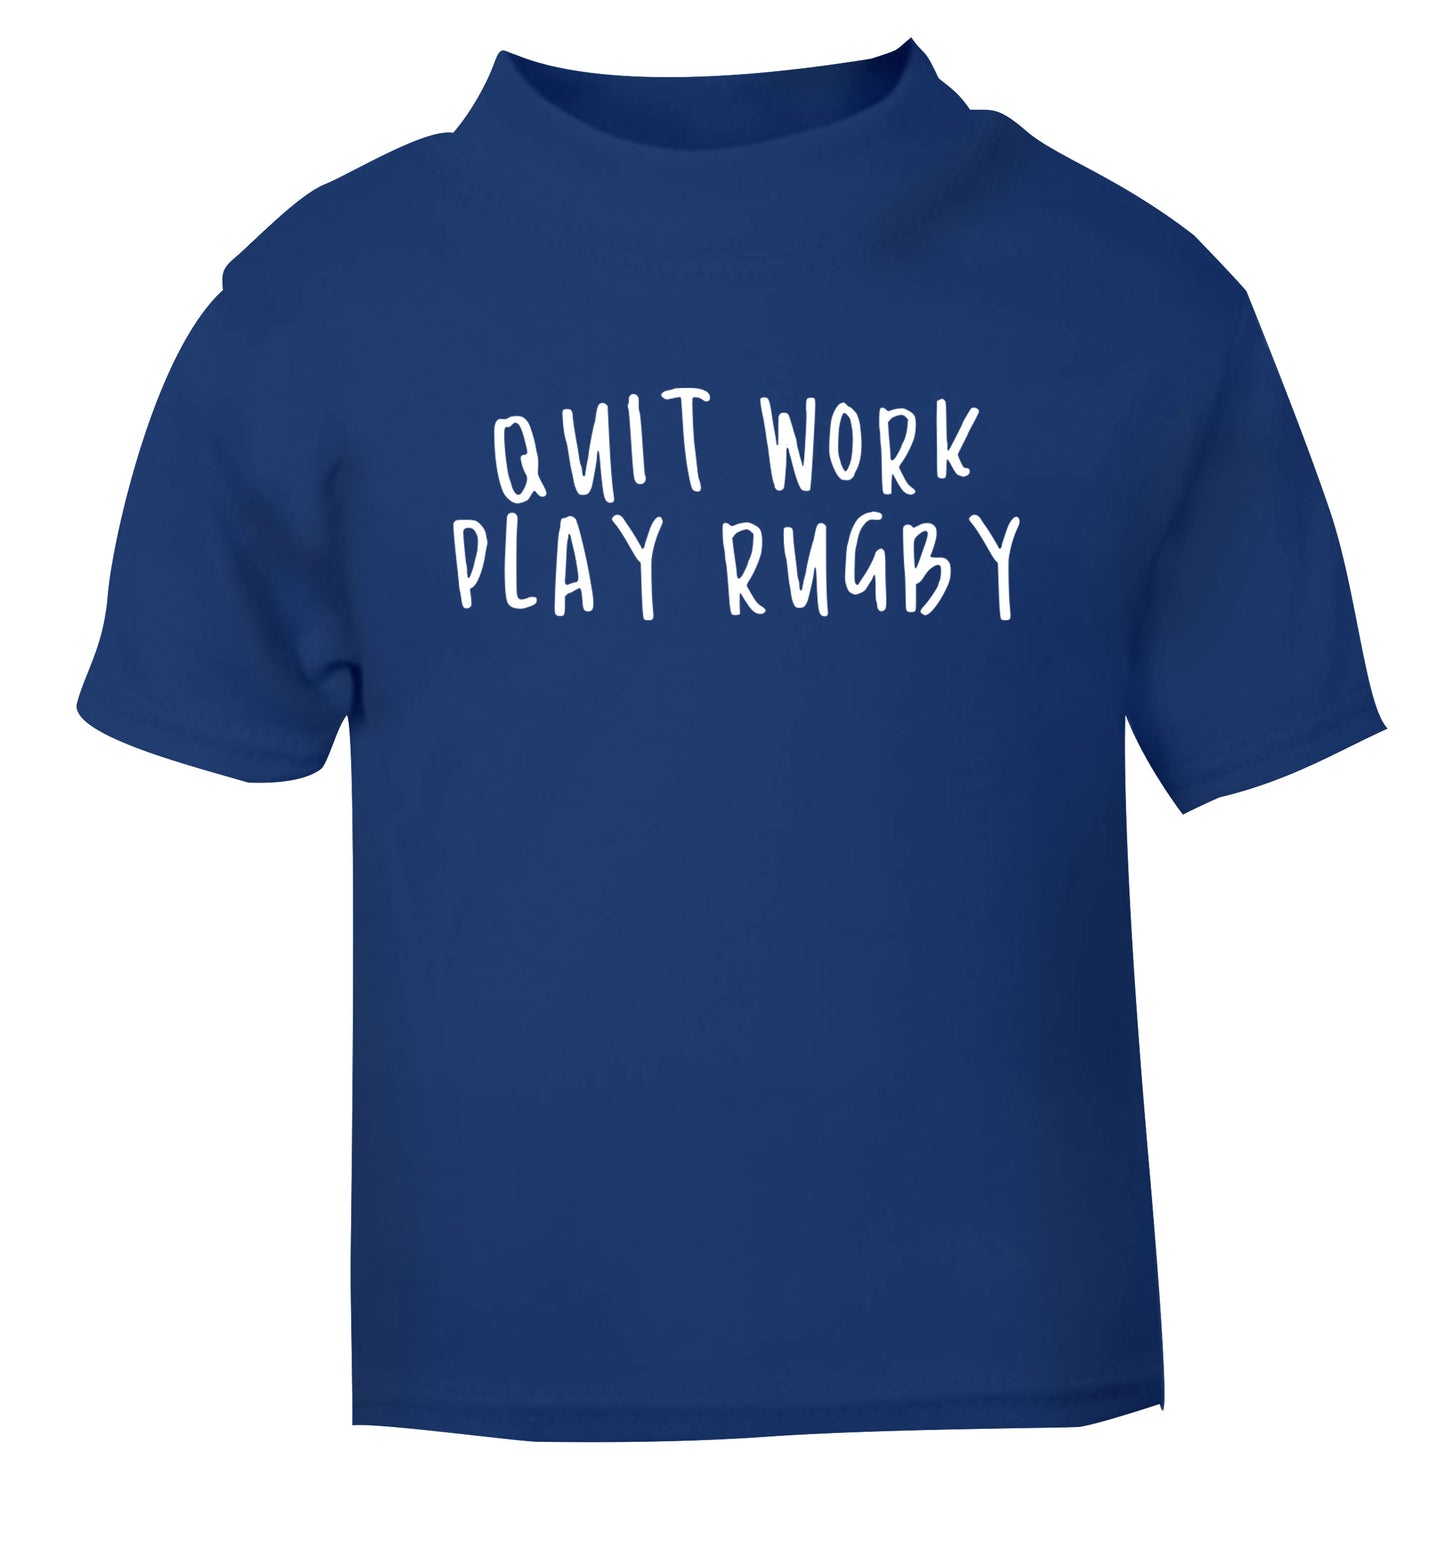 Quit work play rugby blue Baby Toddler Tshirt 2 Years